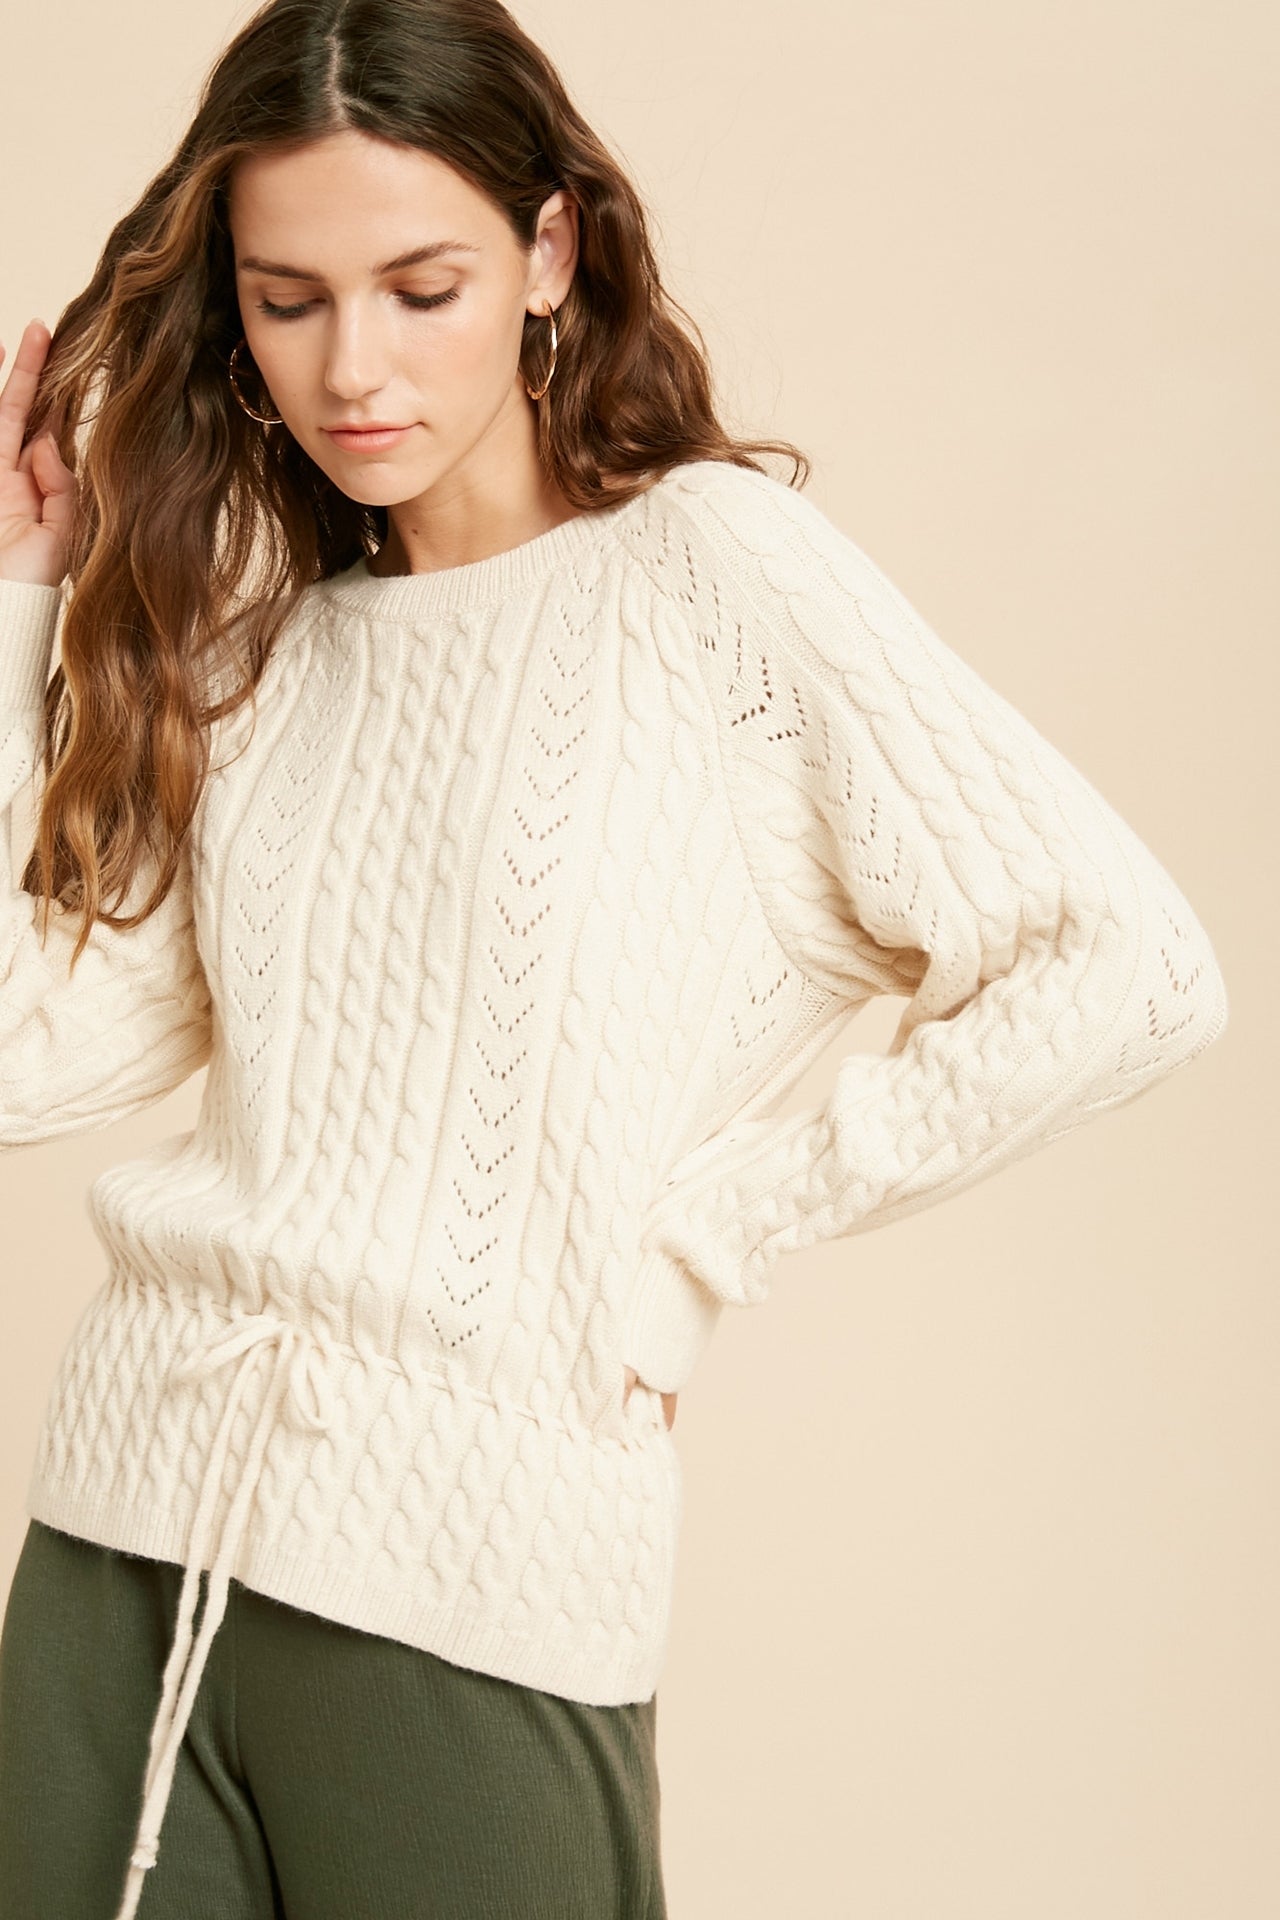 Cable Knit Drawstring Long Sleeve Sweater in Cream color.